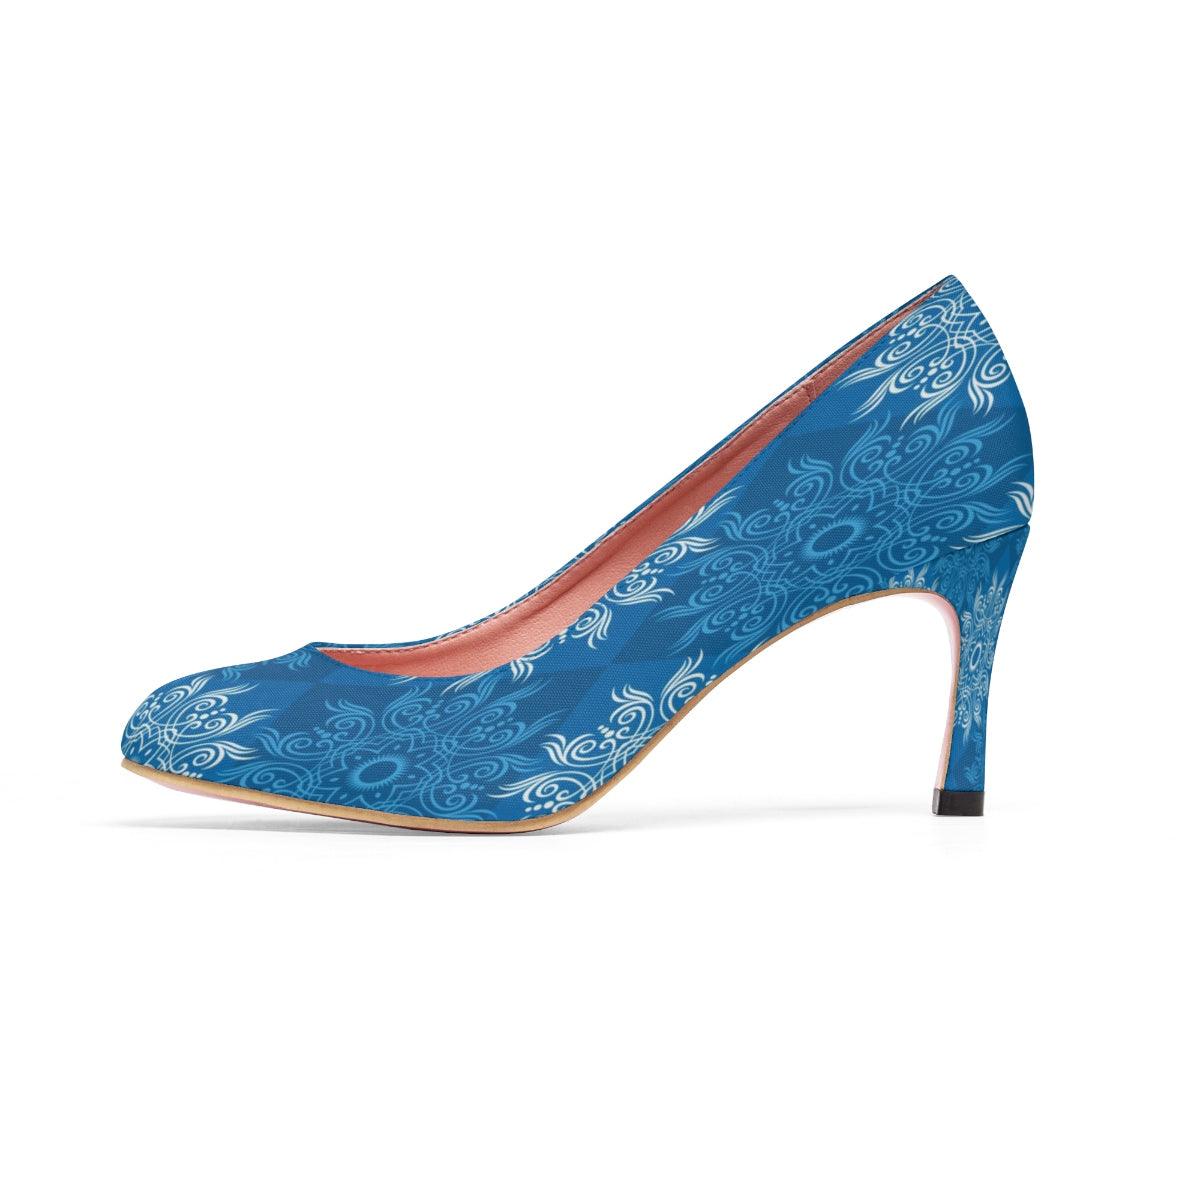 Blue Snow Women's High Heels - Buyashoes